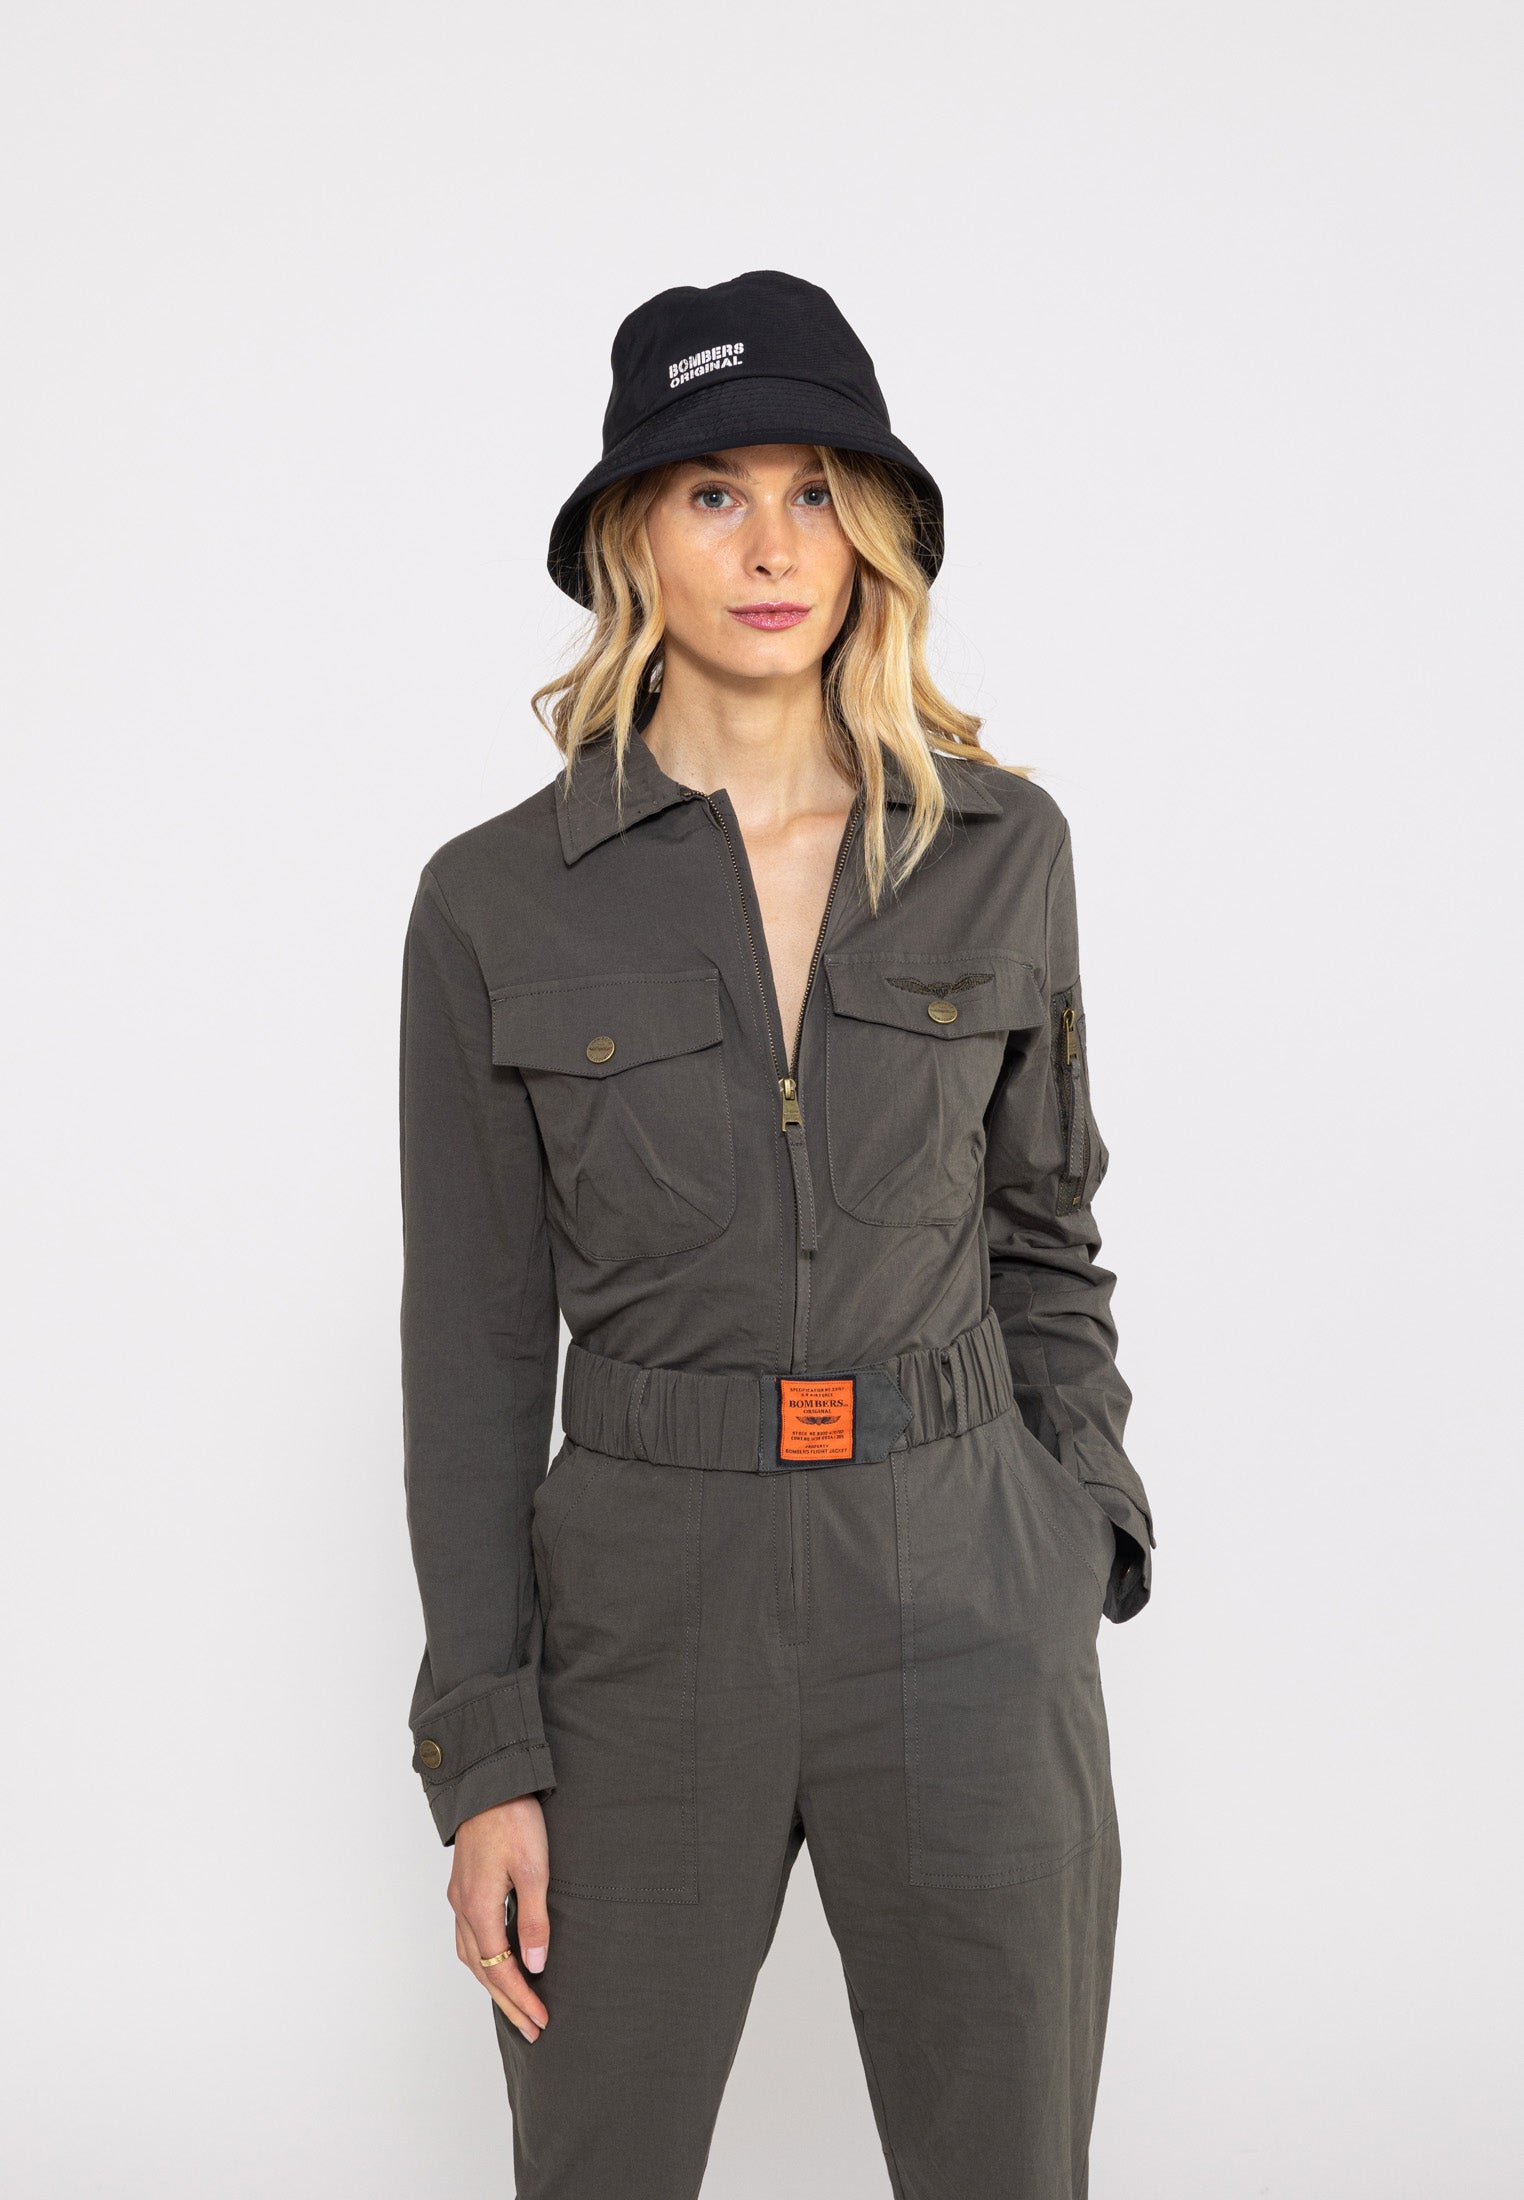 All Over Jumpsuit in Khaki Overall Bombers Original   